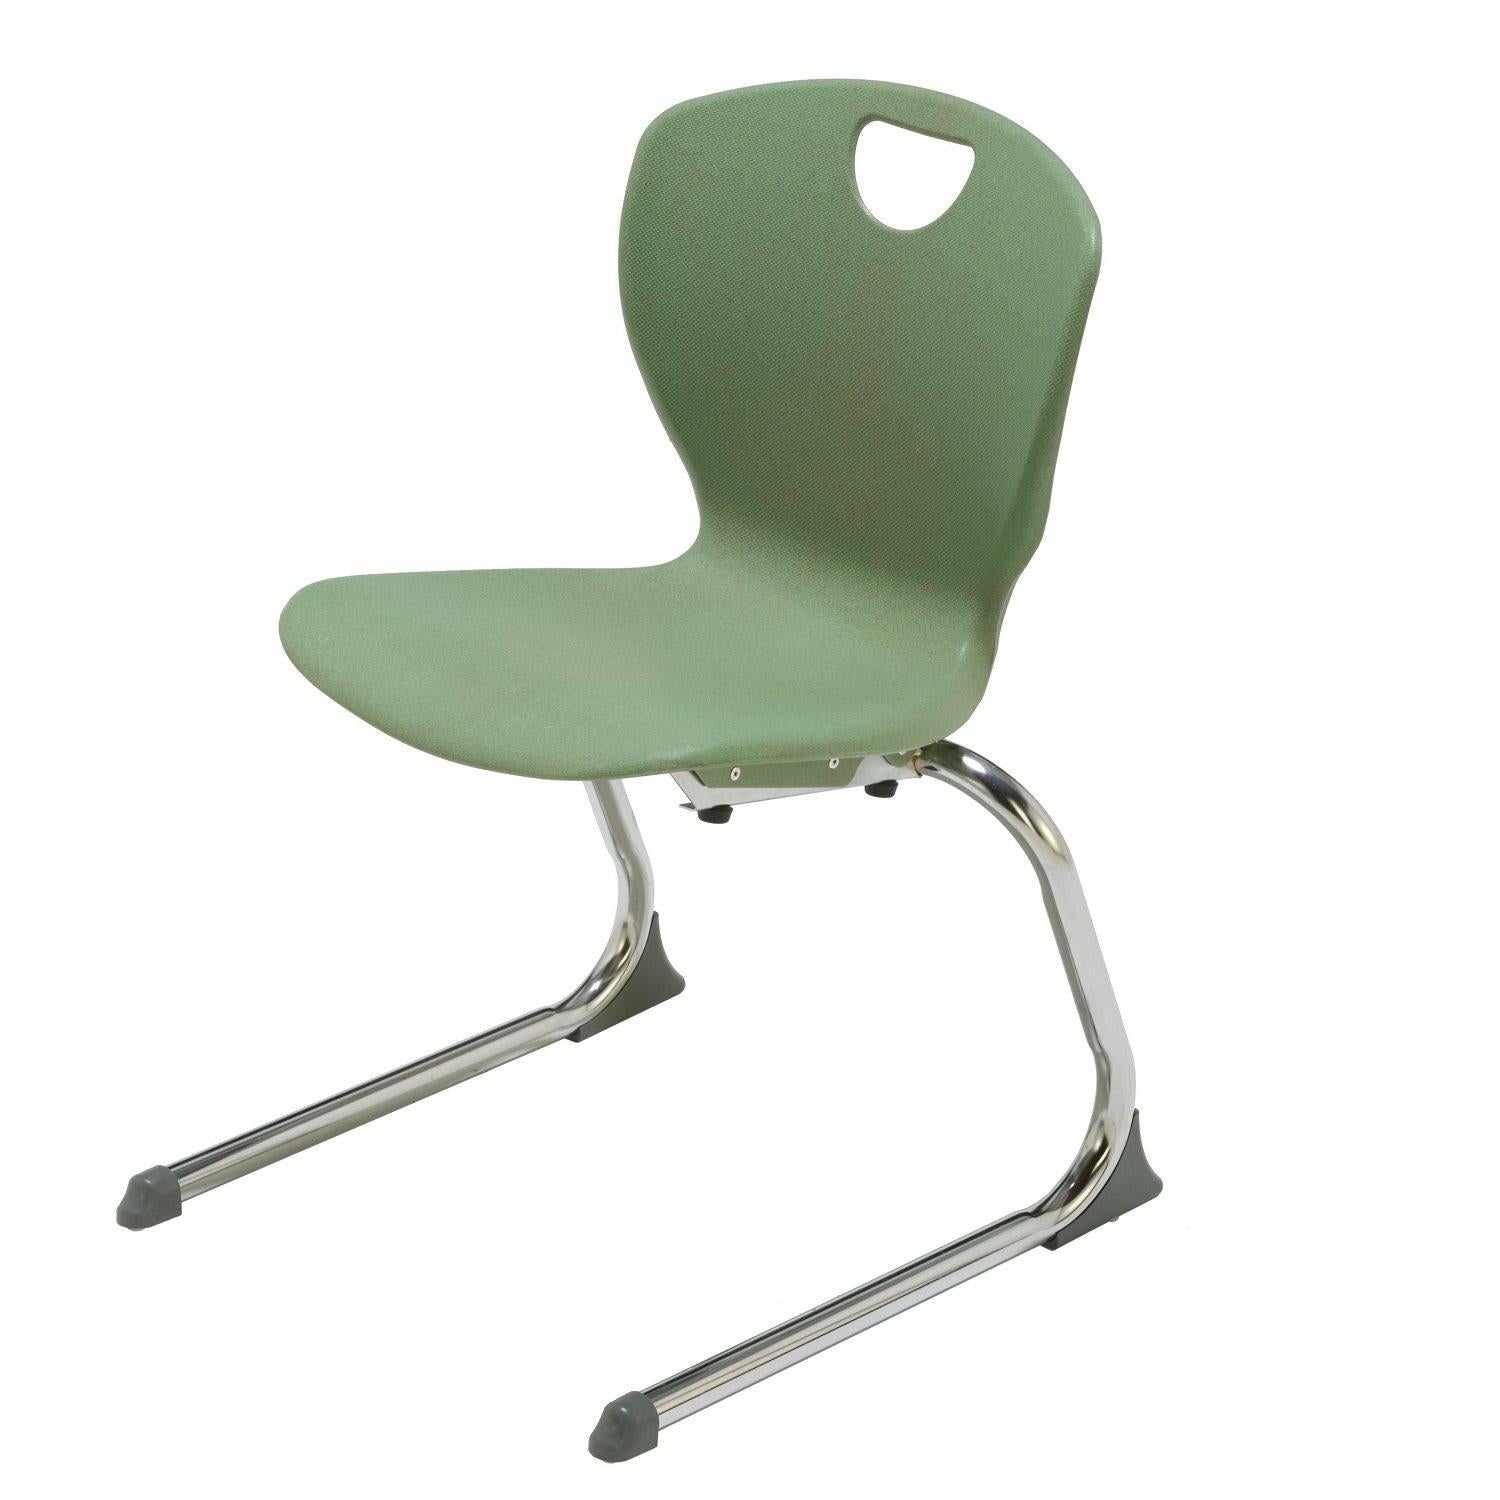 Ovation Cantilever Stacking Student Chair, 14" Seat Height